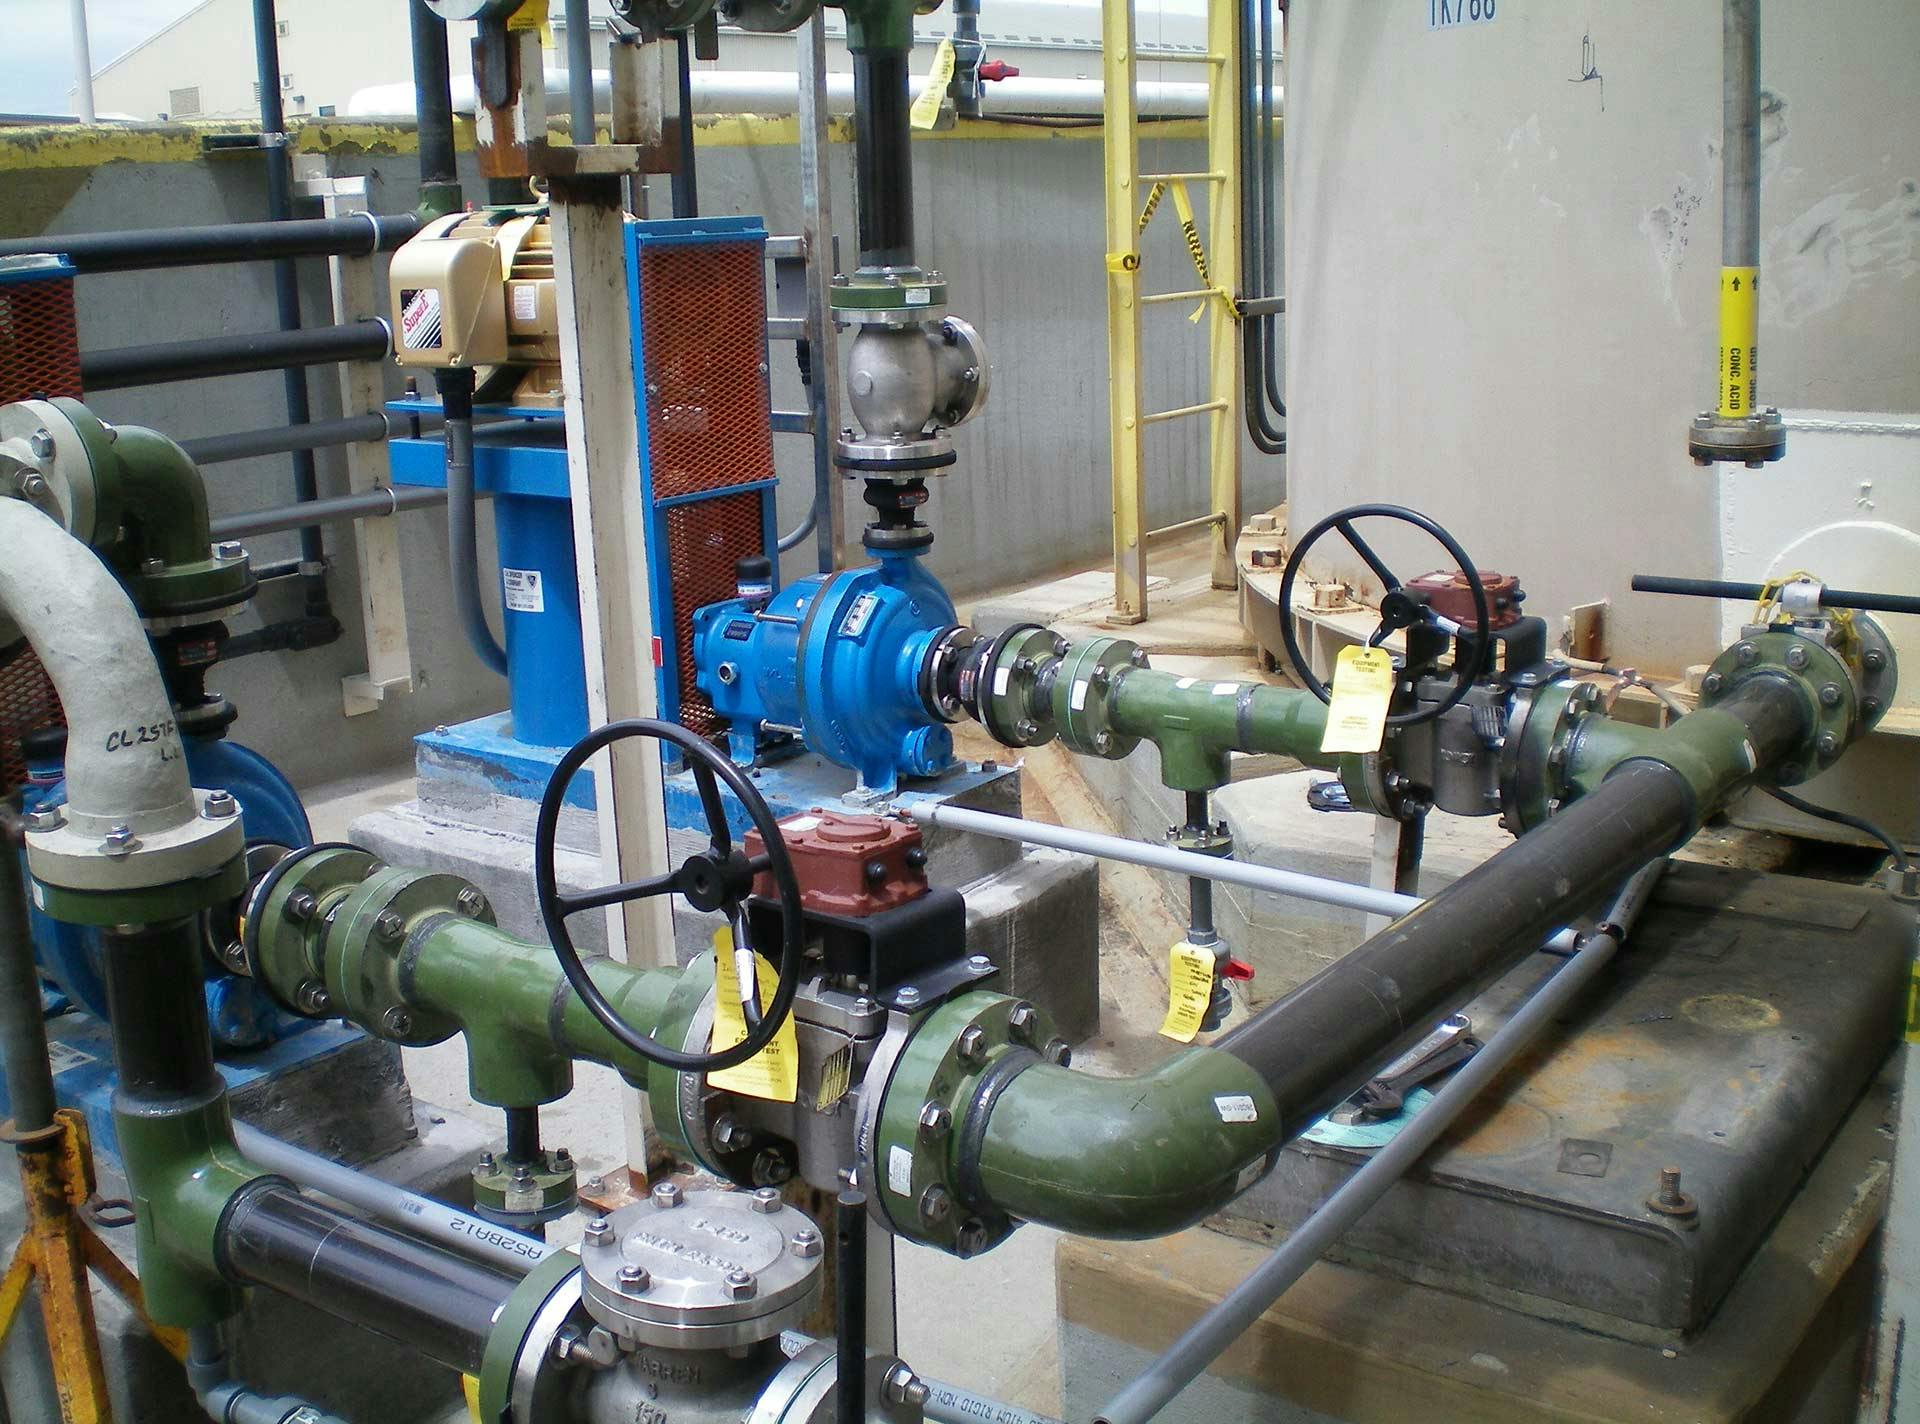 A Z-Core fiberglass pipe system with turnable valves